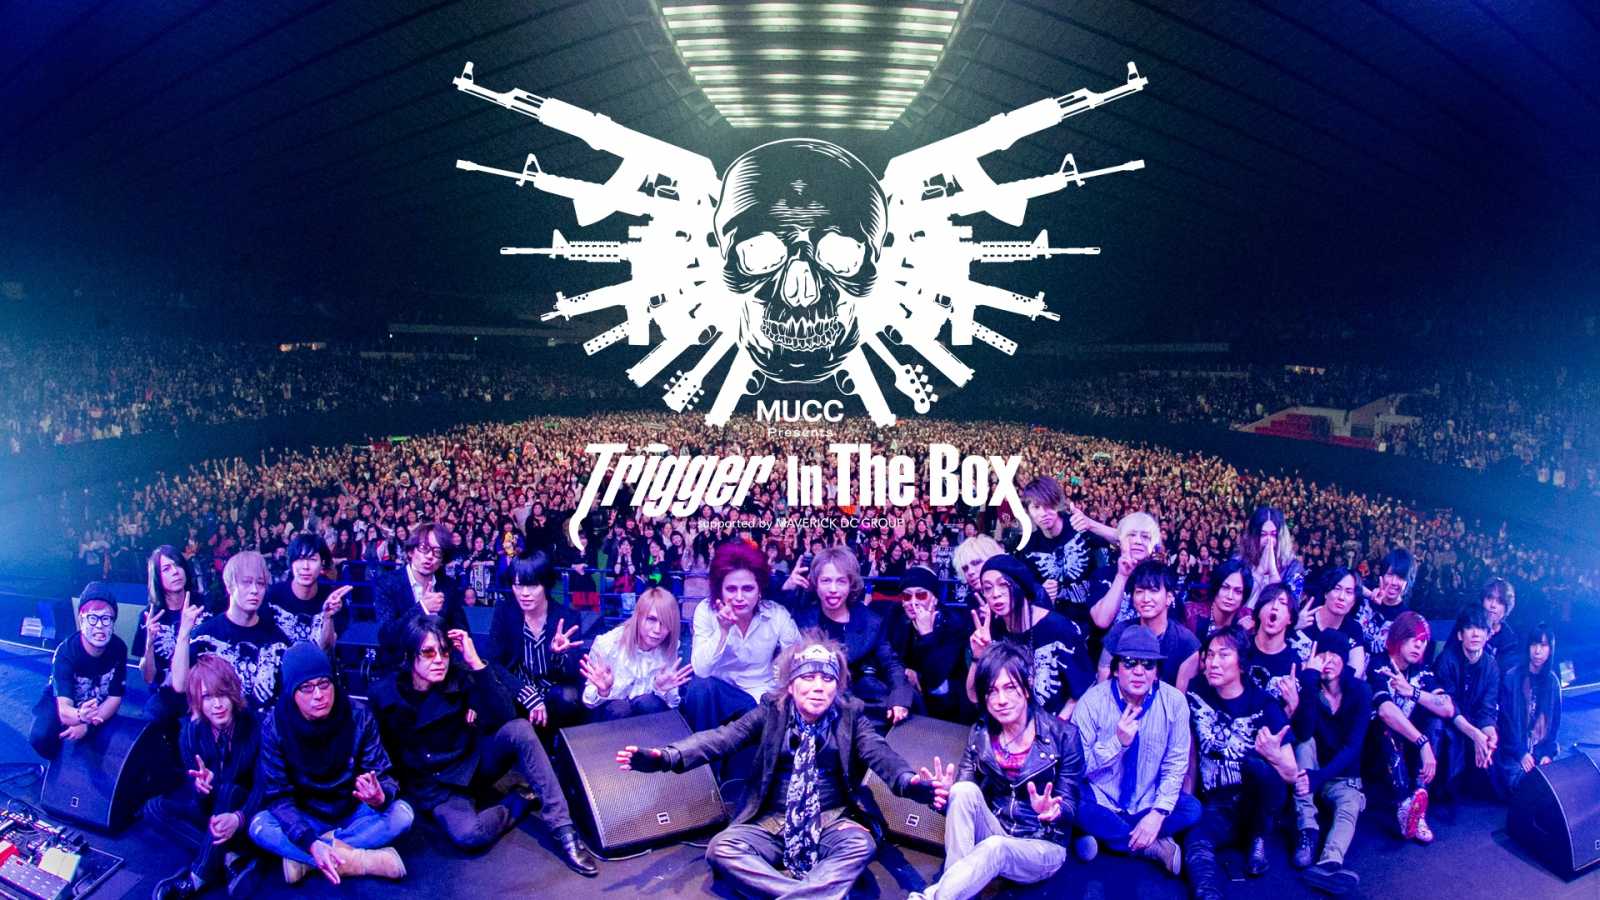 Le festival "Trigger In The Box" disponible sur YouTube et Niconico © Trigger In The Box. All rights reserved.